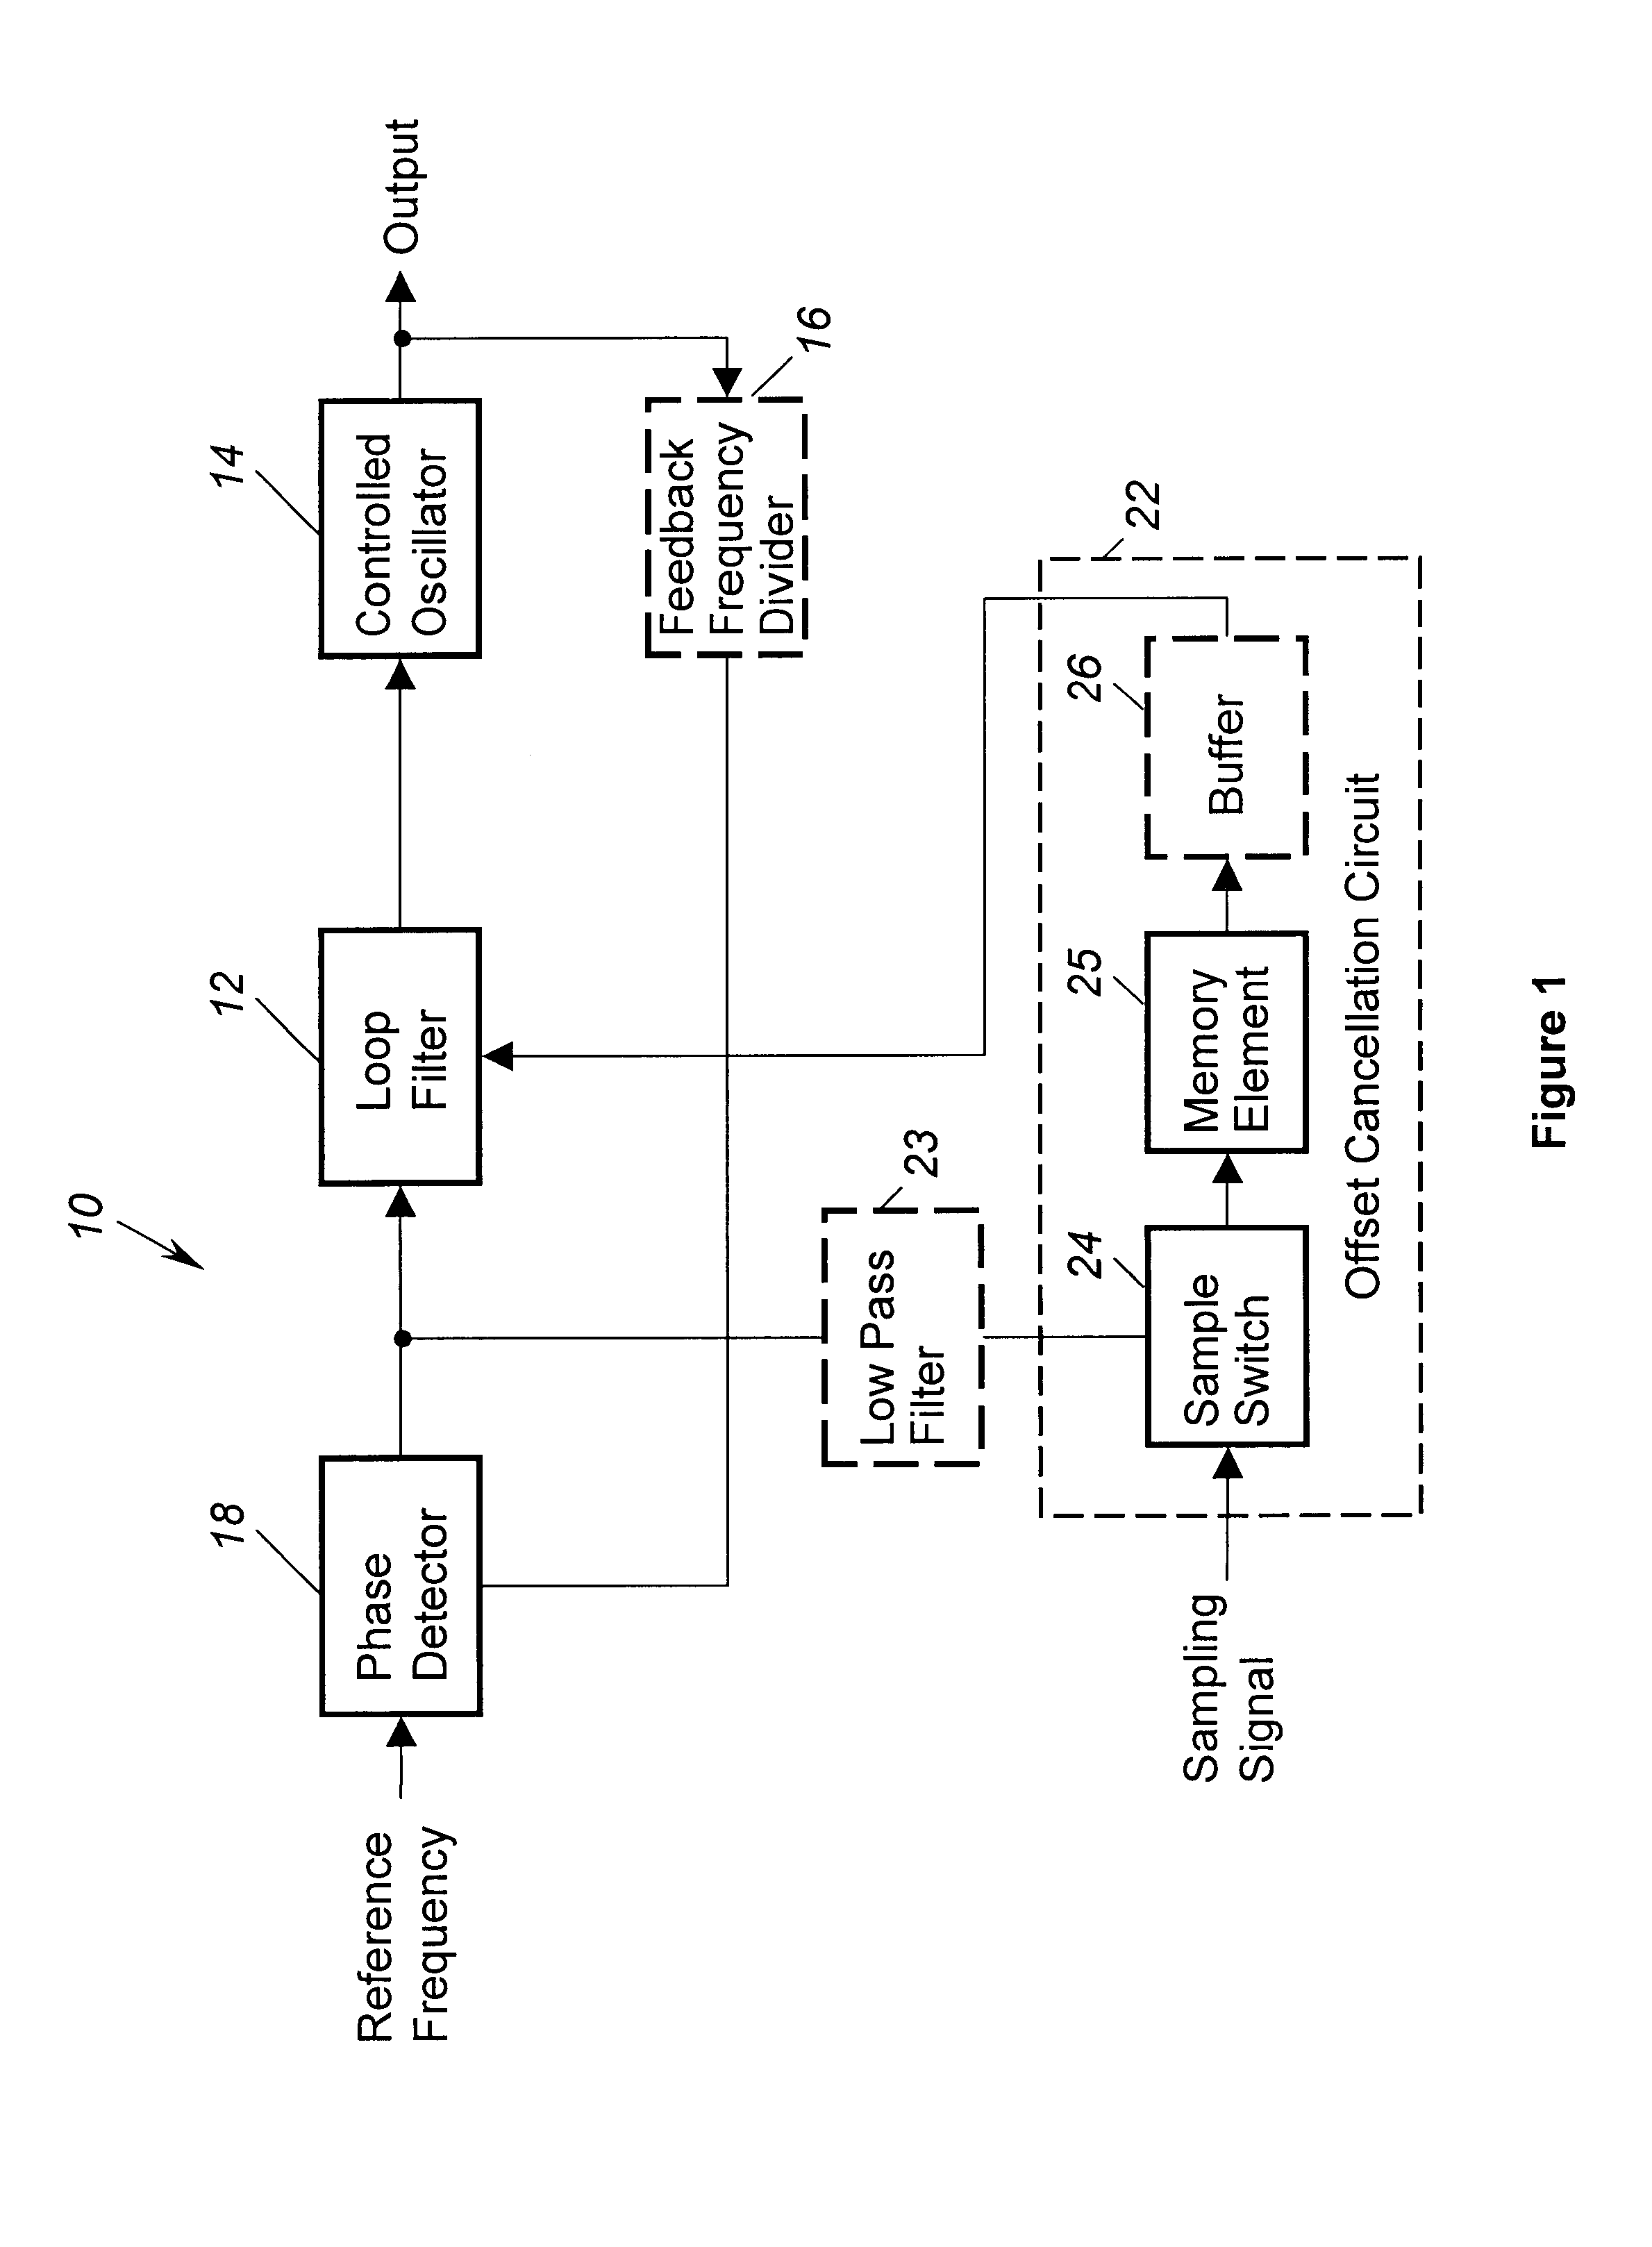 Phase locked loop with offset cancellation